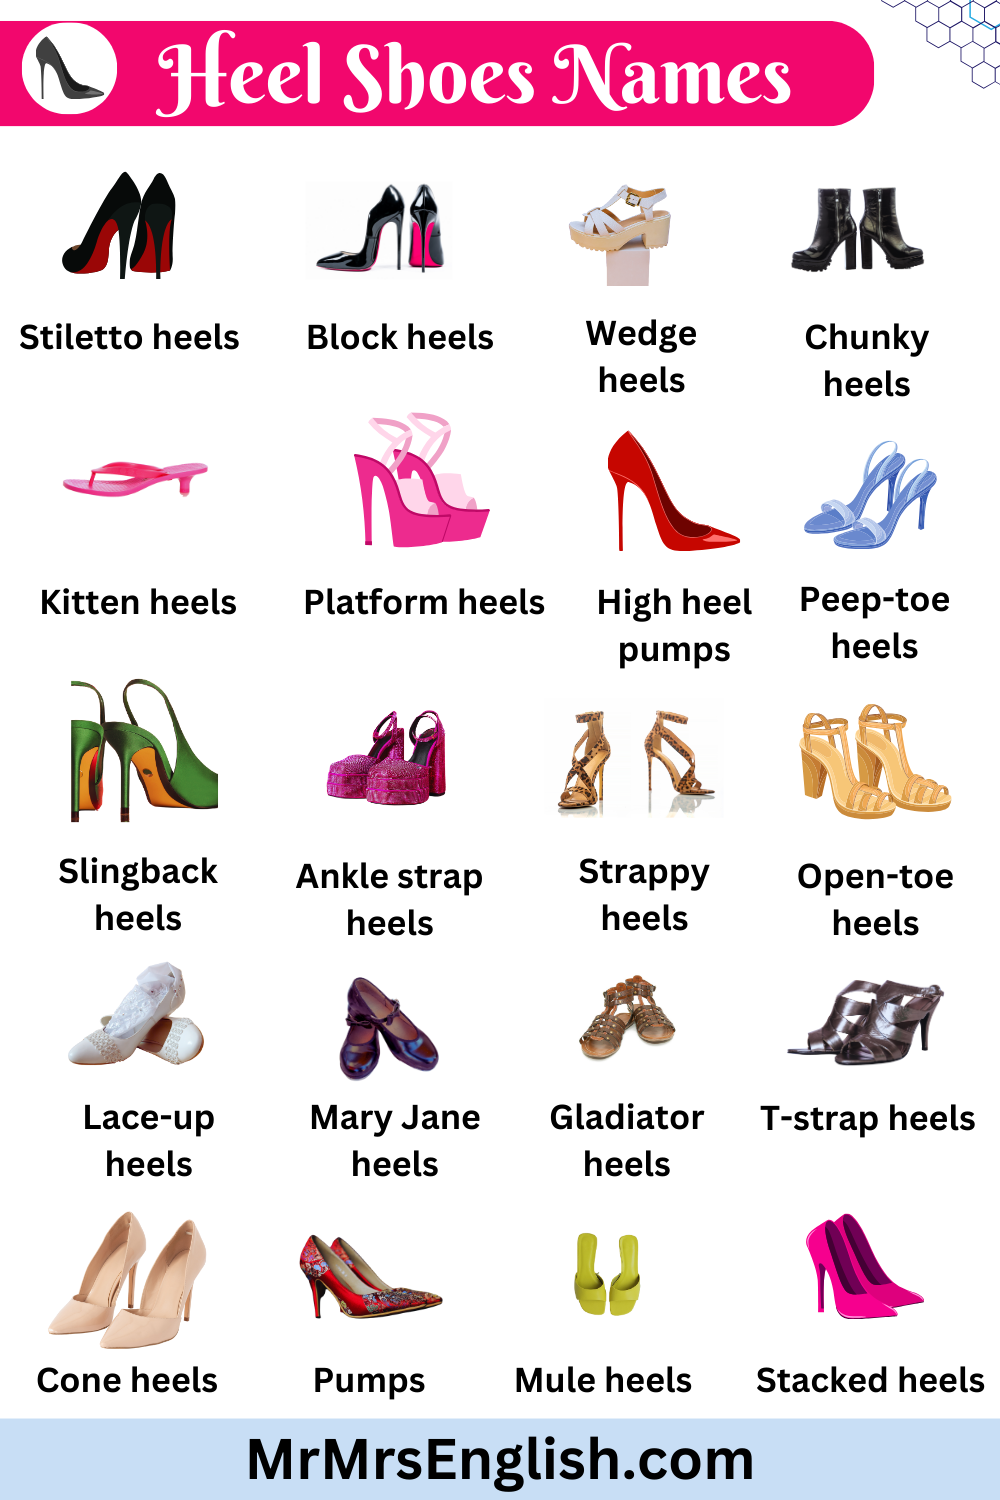 Heel shoes Type of Shoes Names in English